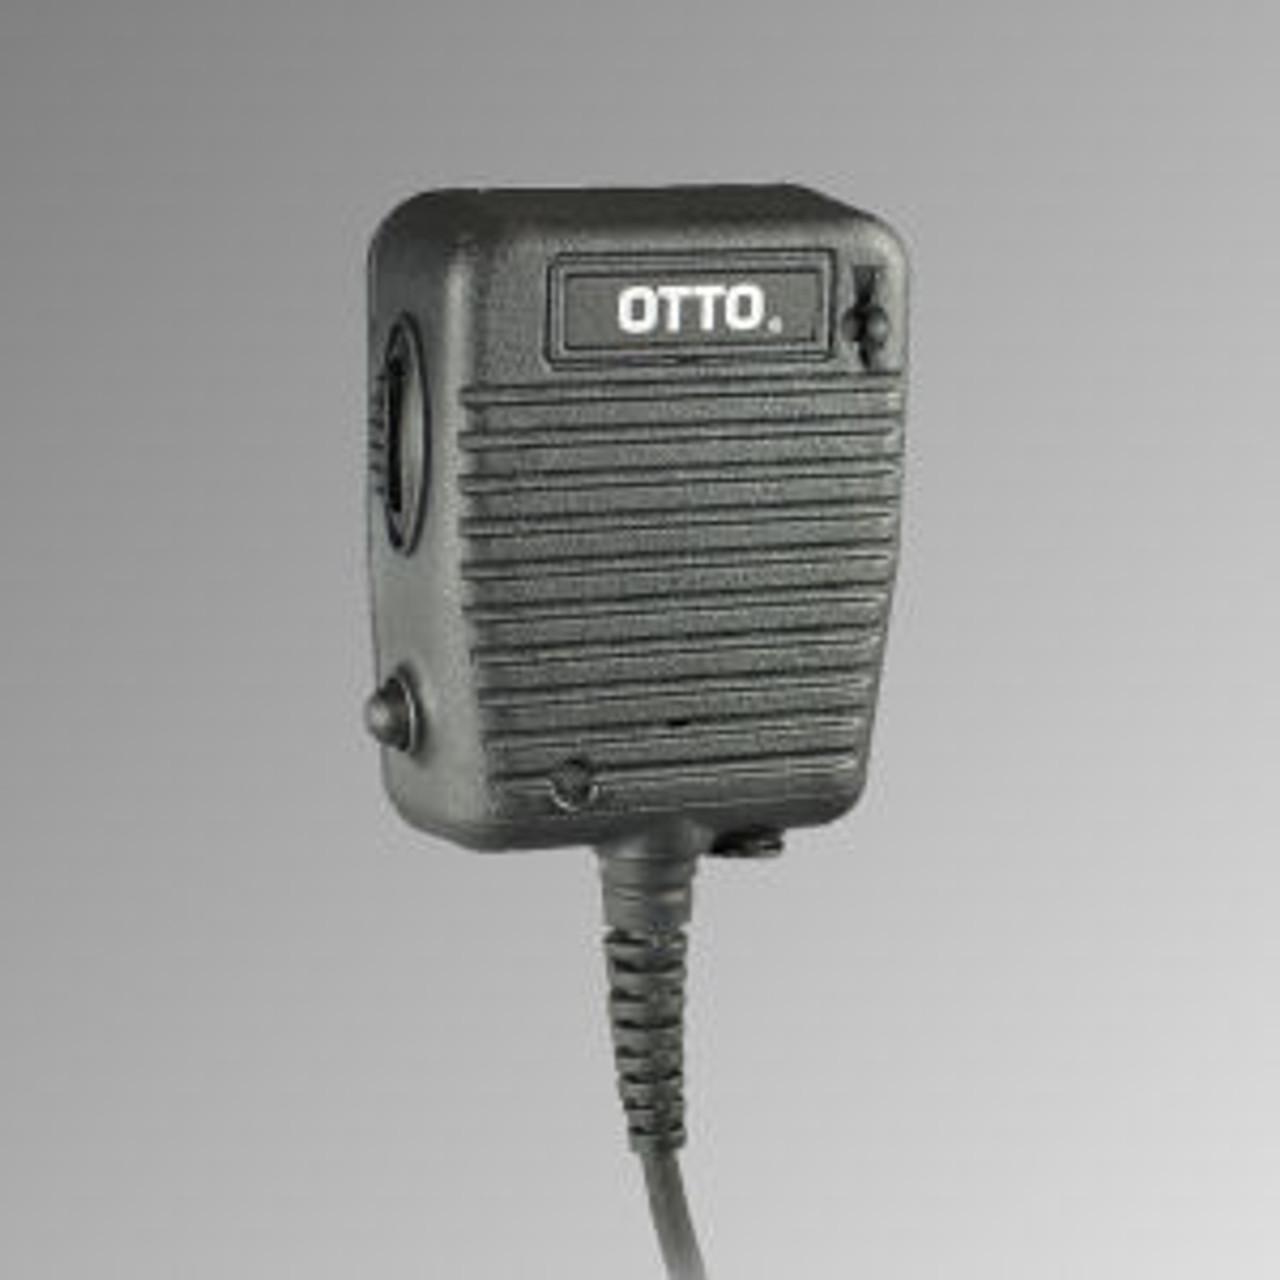 Otto Storm Mic For Harris P7230